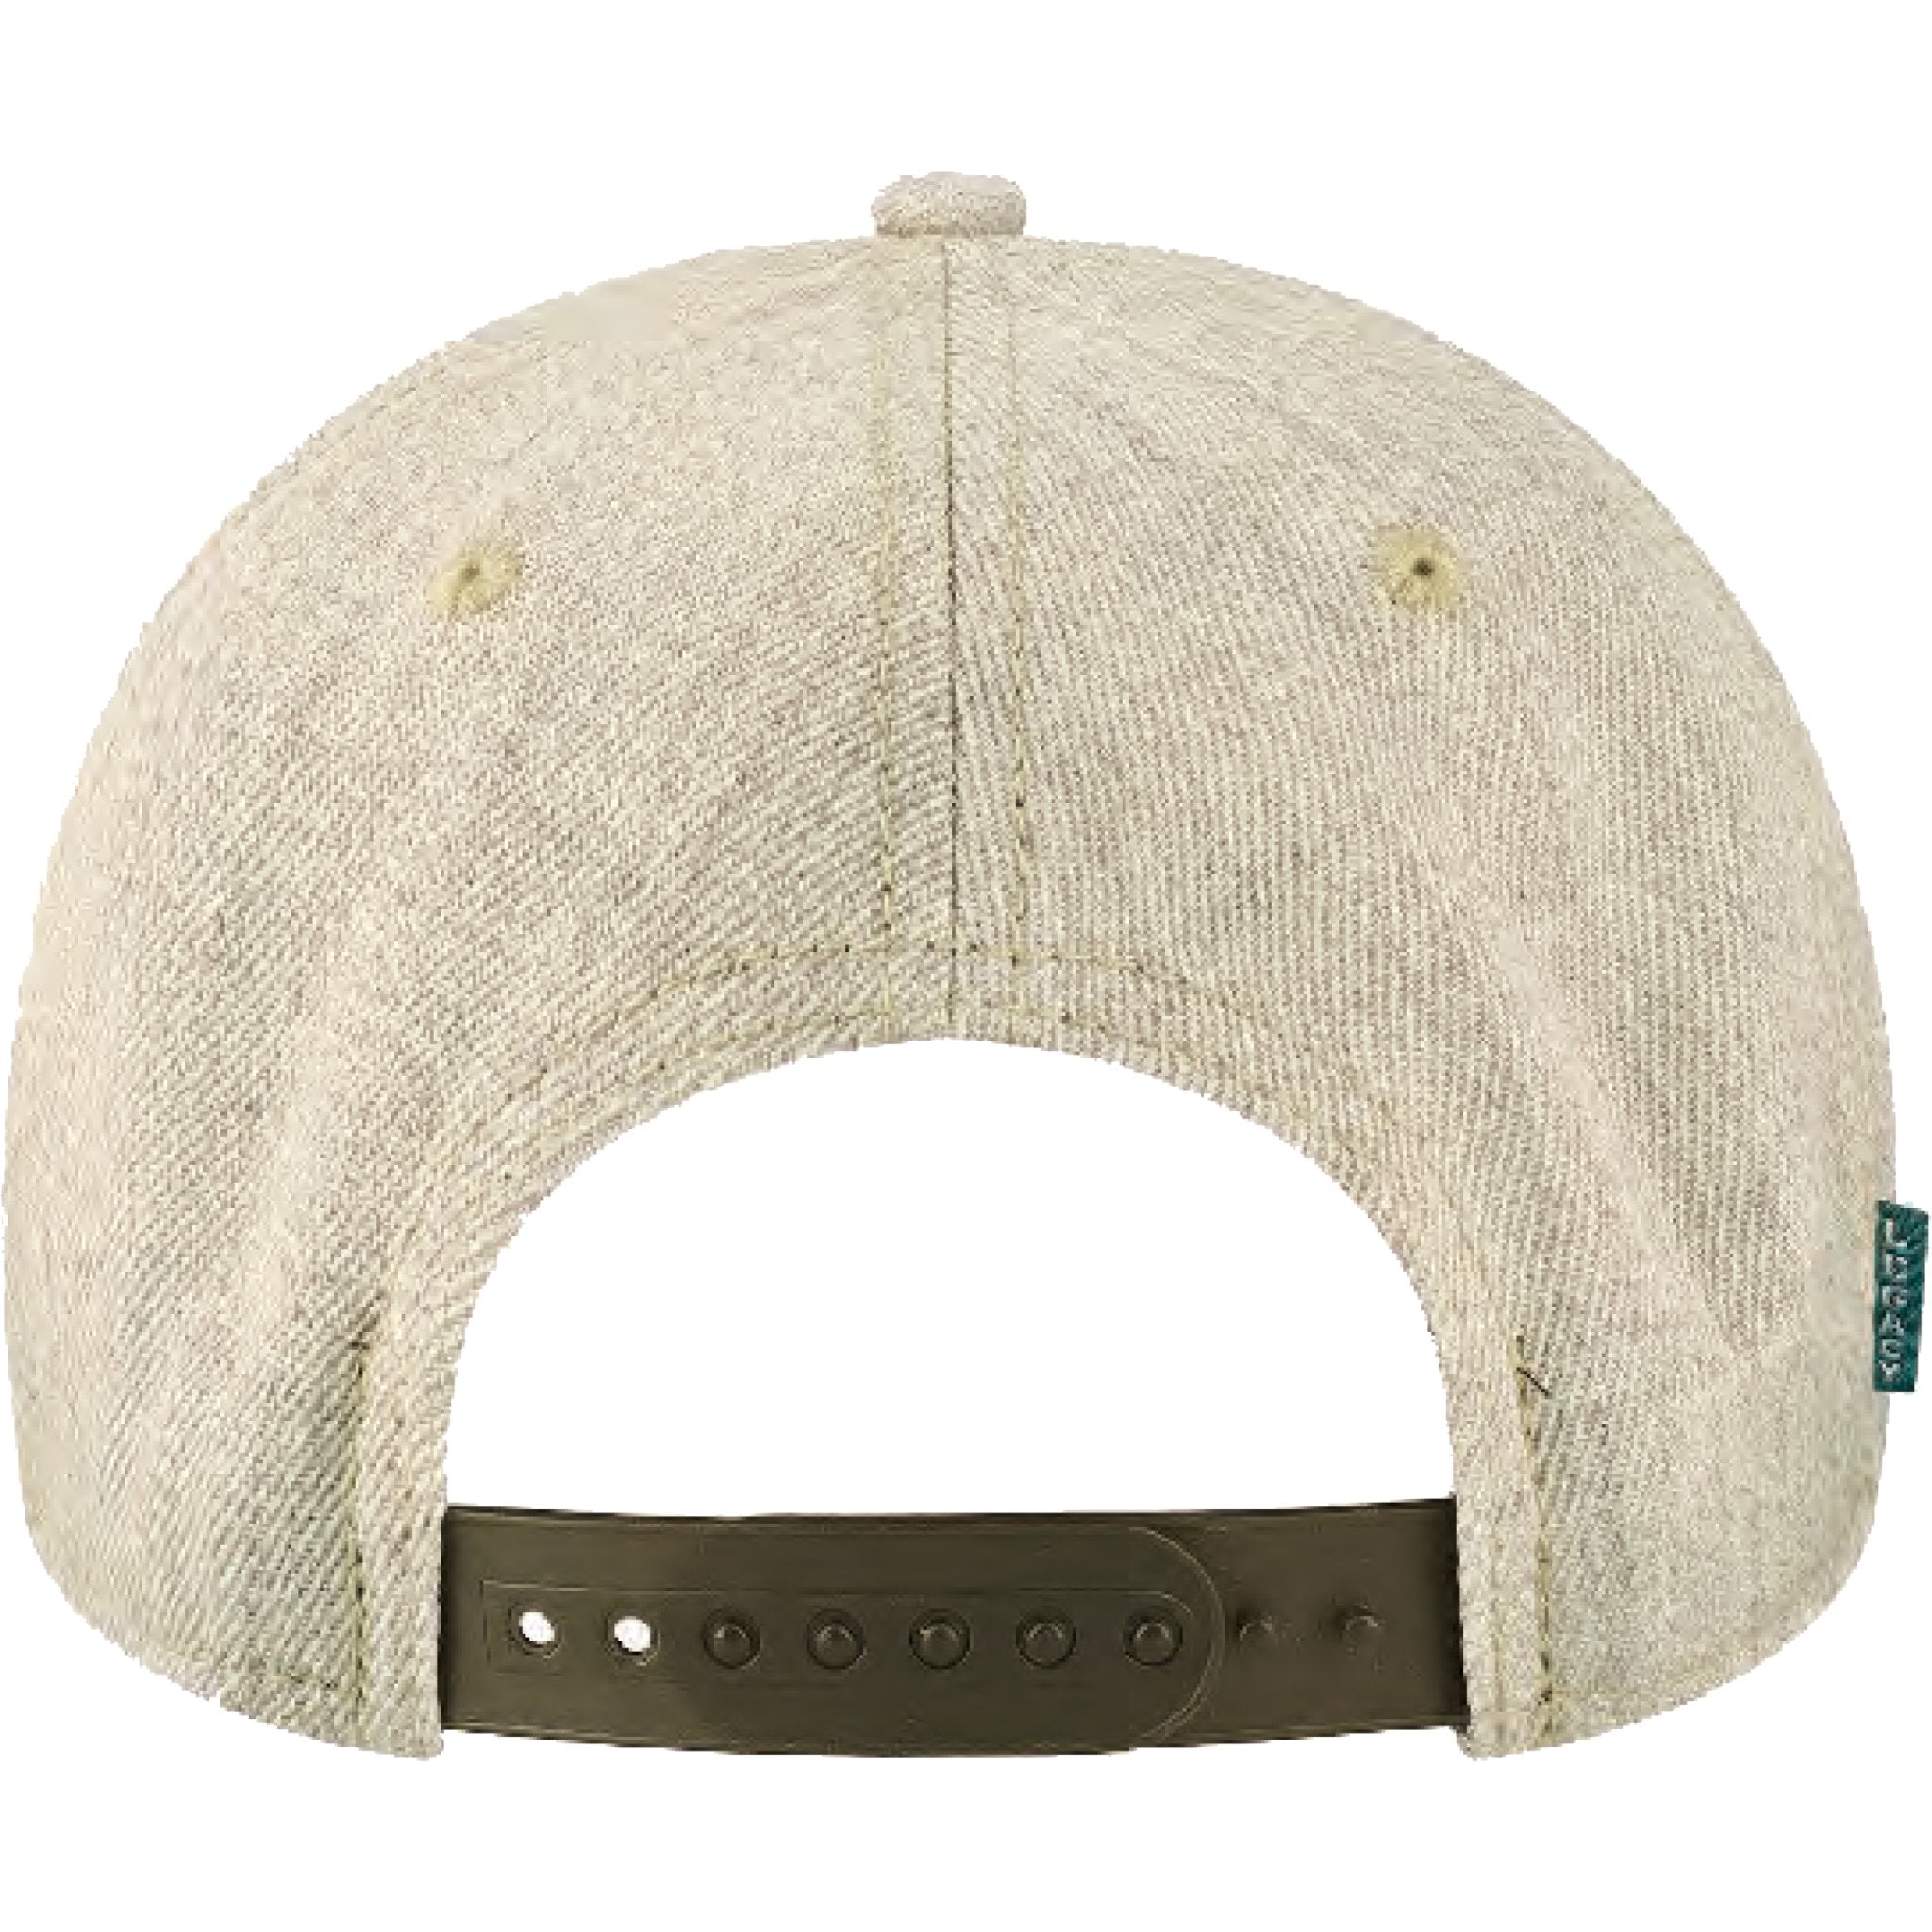 North American Aviation Engraved Letter Applique (Heather Tan/Brown) Ball Cap - PilotMall.com